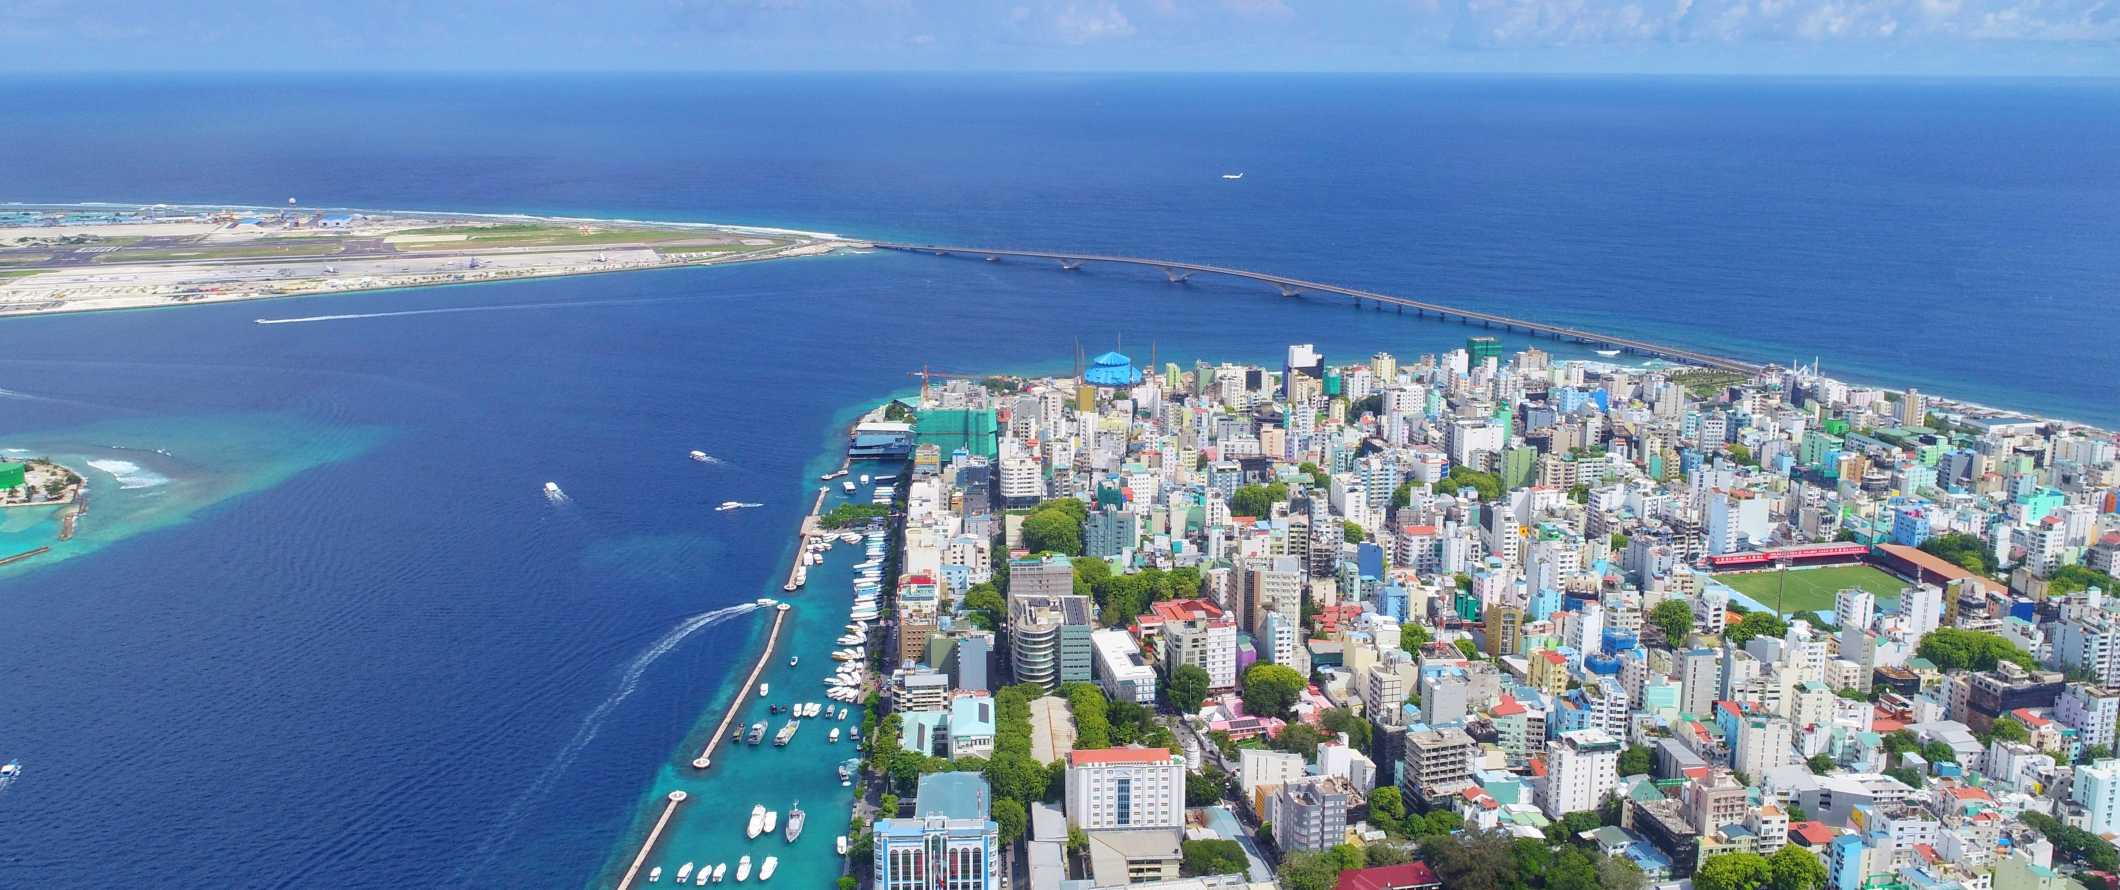 Aerial view of the city of Male surrounded by the dark blue ocean in the Maldives